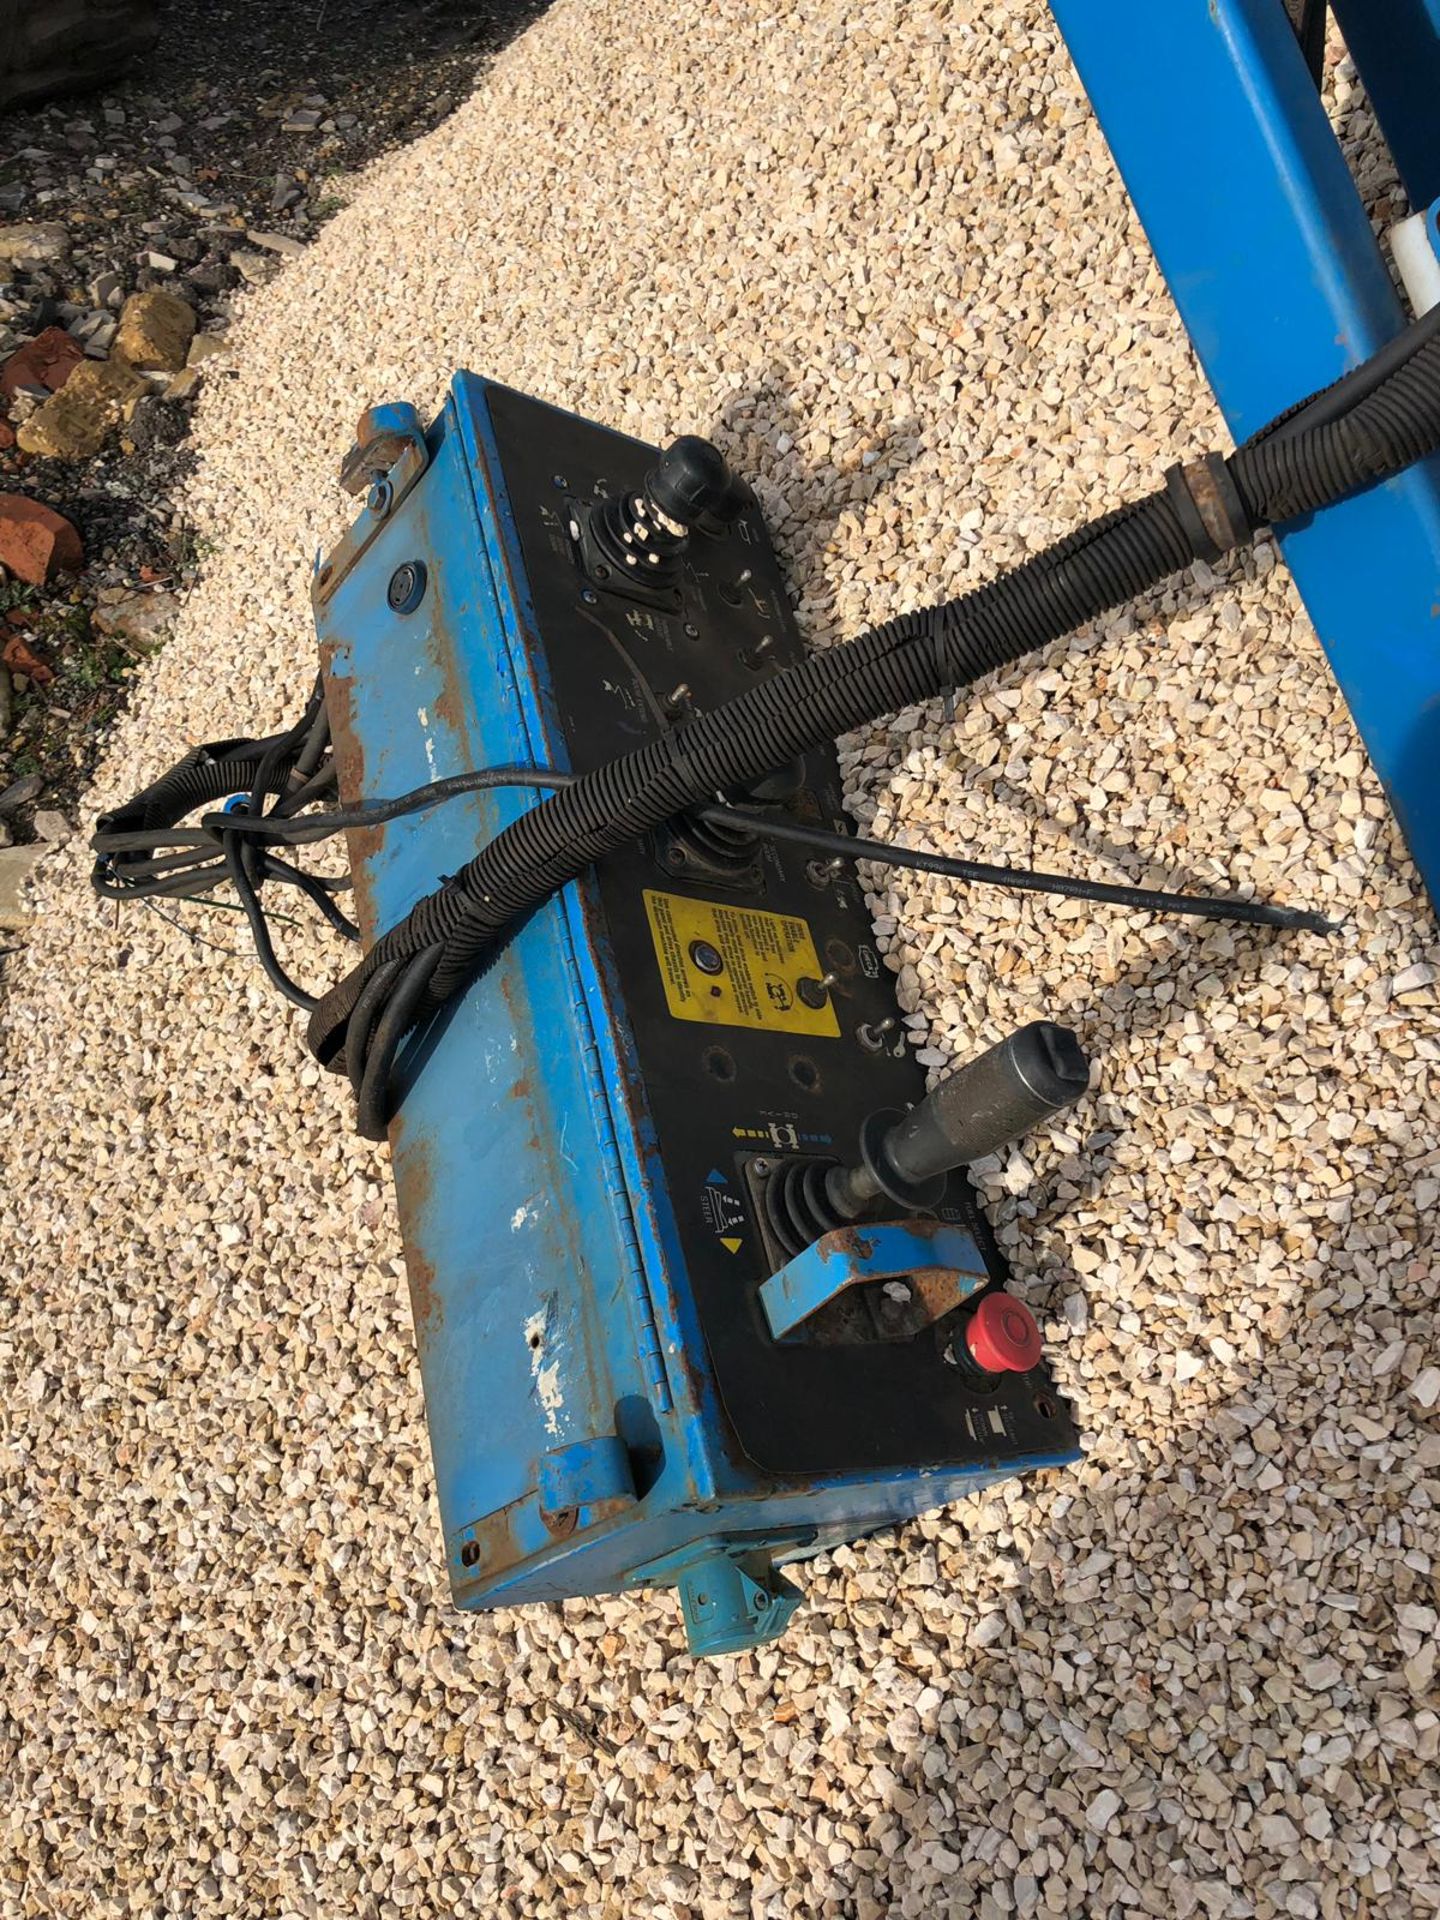 TWO 2 X GENIE BOOM LIFTS MODEL Z45 - 25J 4X4, YEAR 2001 SELLING AS SPARES / REPAIRS *PLUS VAT* - Image 3 of 8